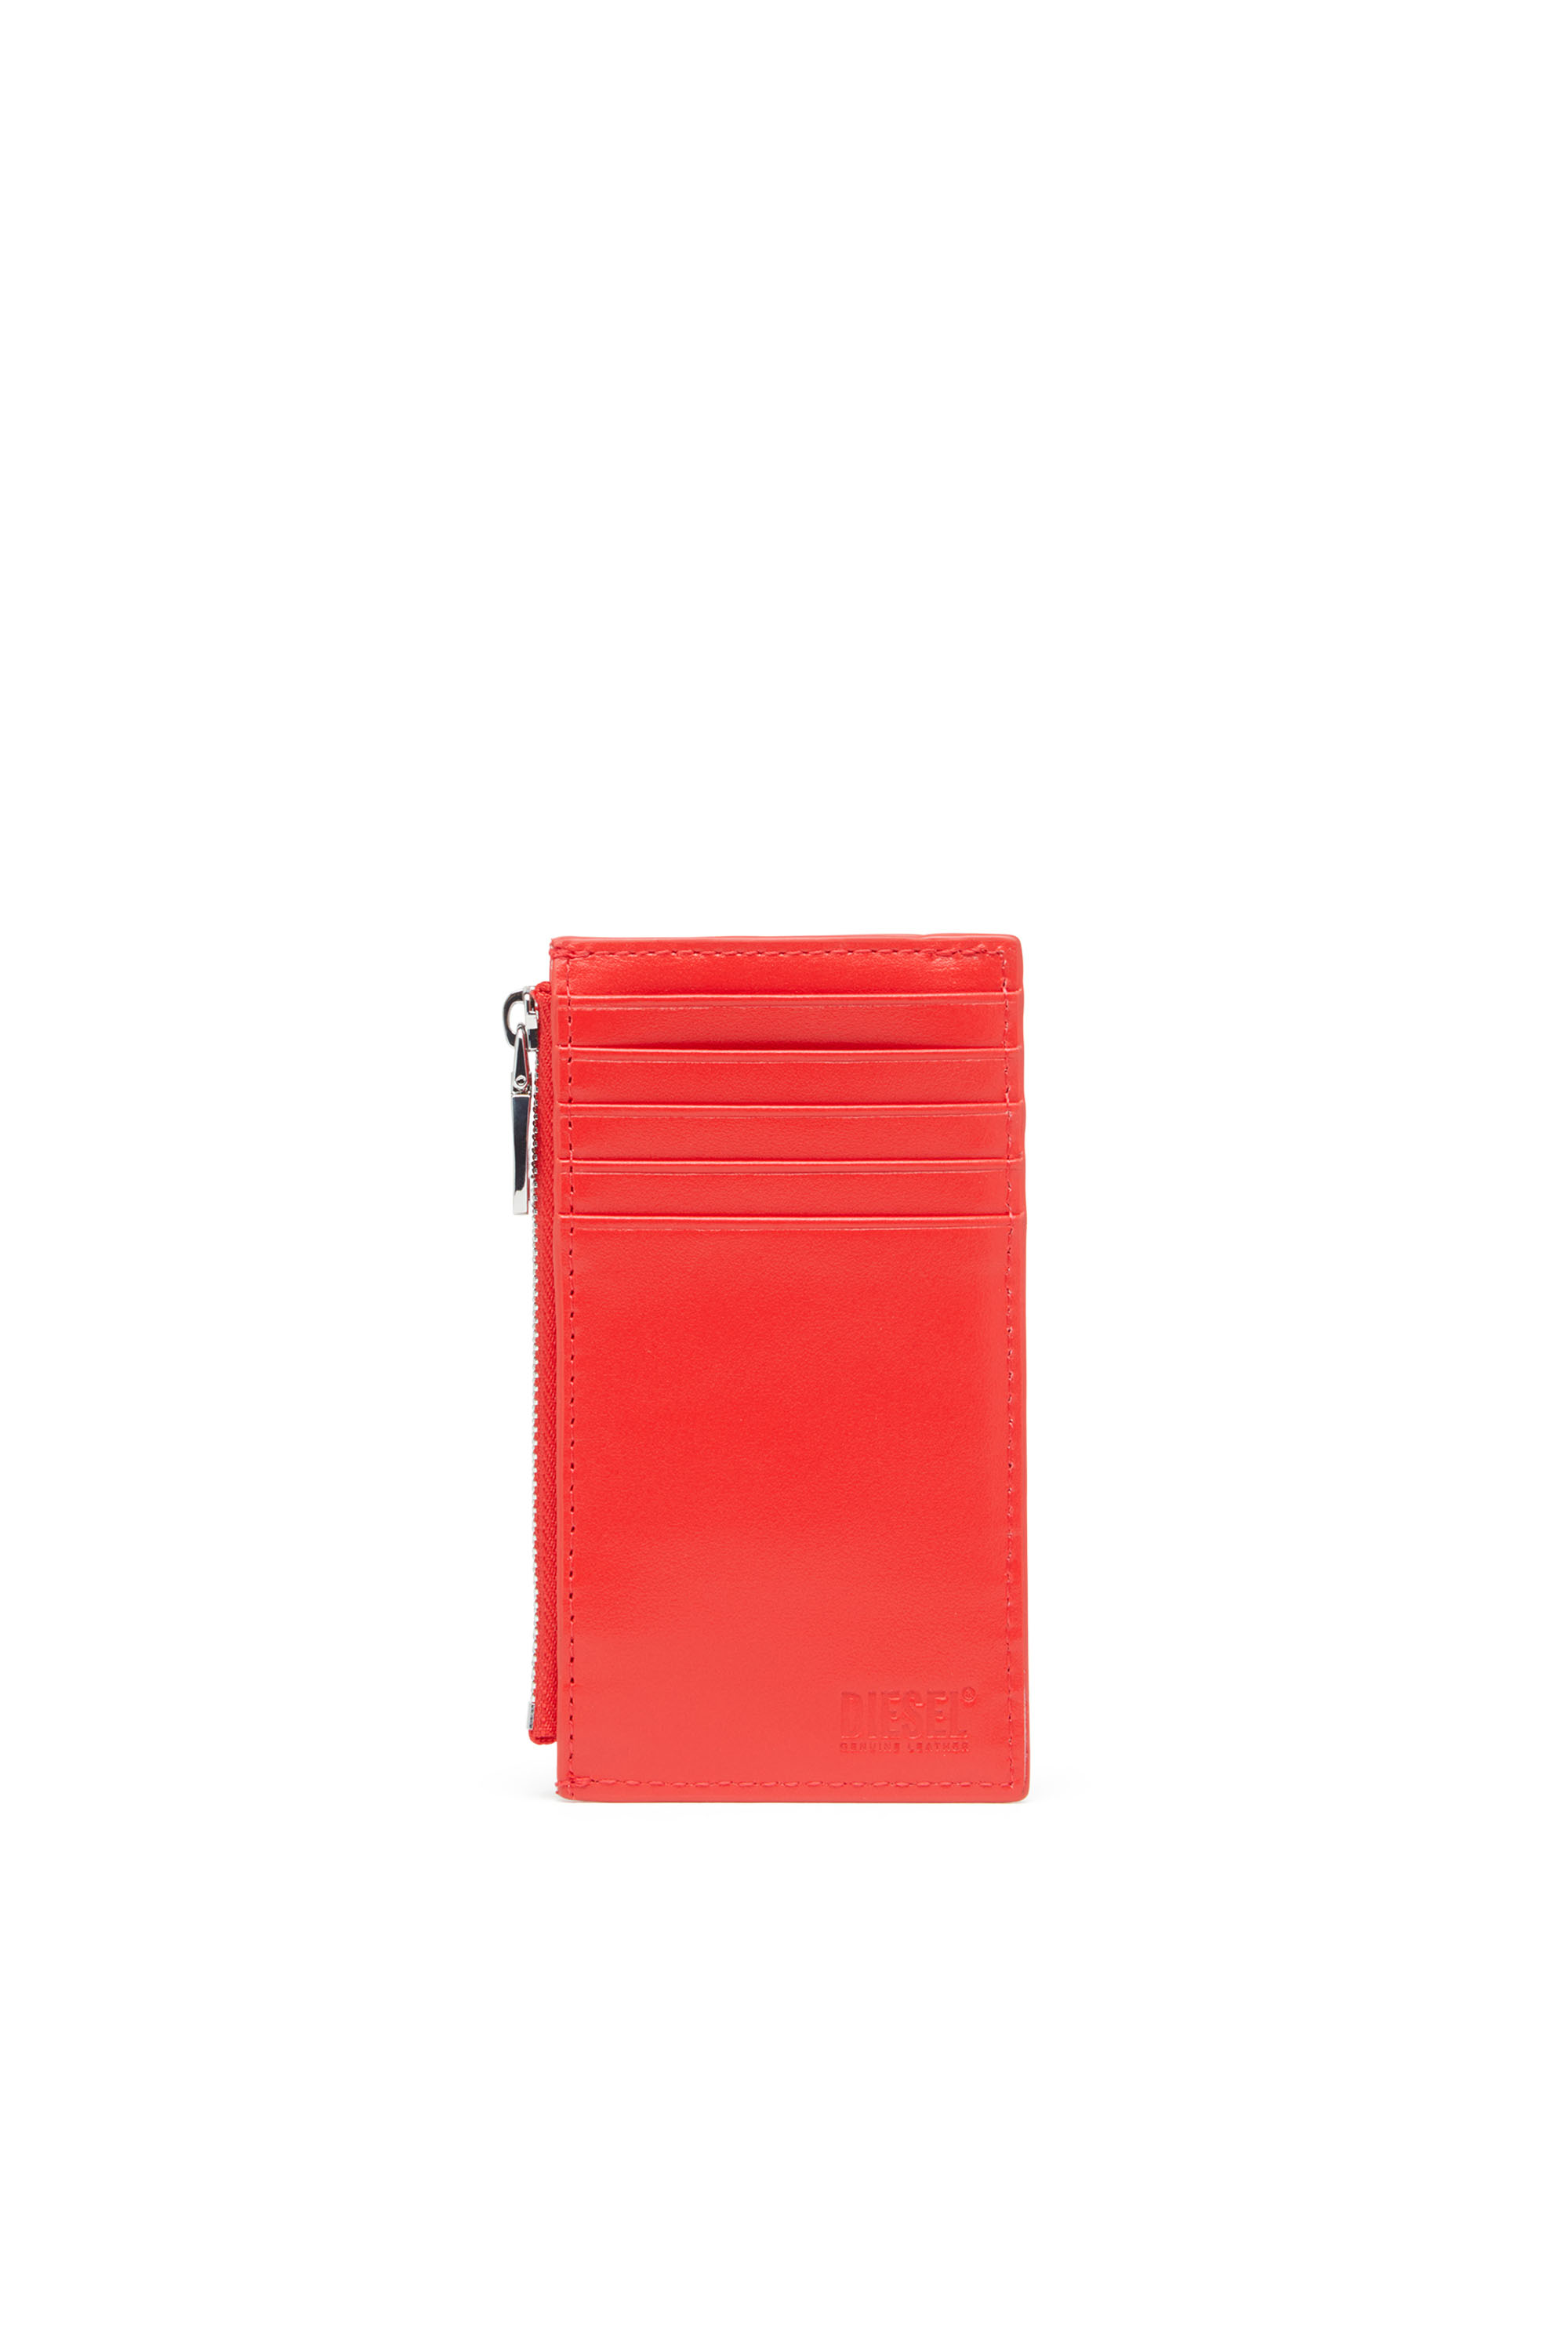 Diesel - PLAY CARD HOLDER III, Female Card holder in glossy leather in レッド - Image 2